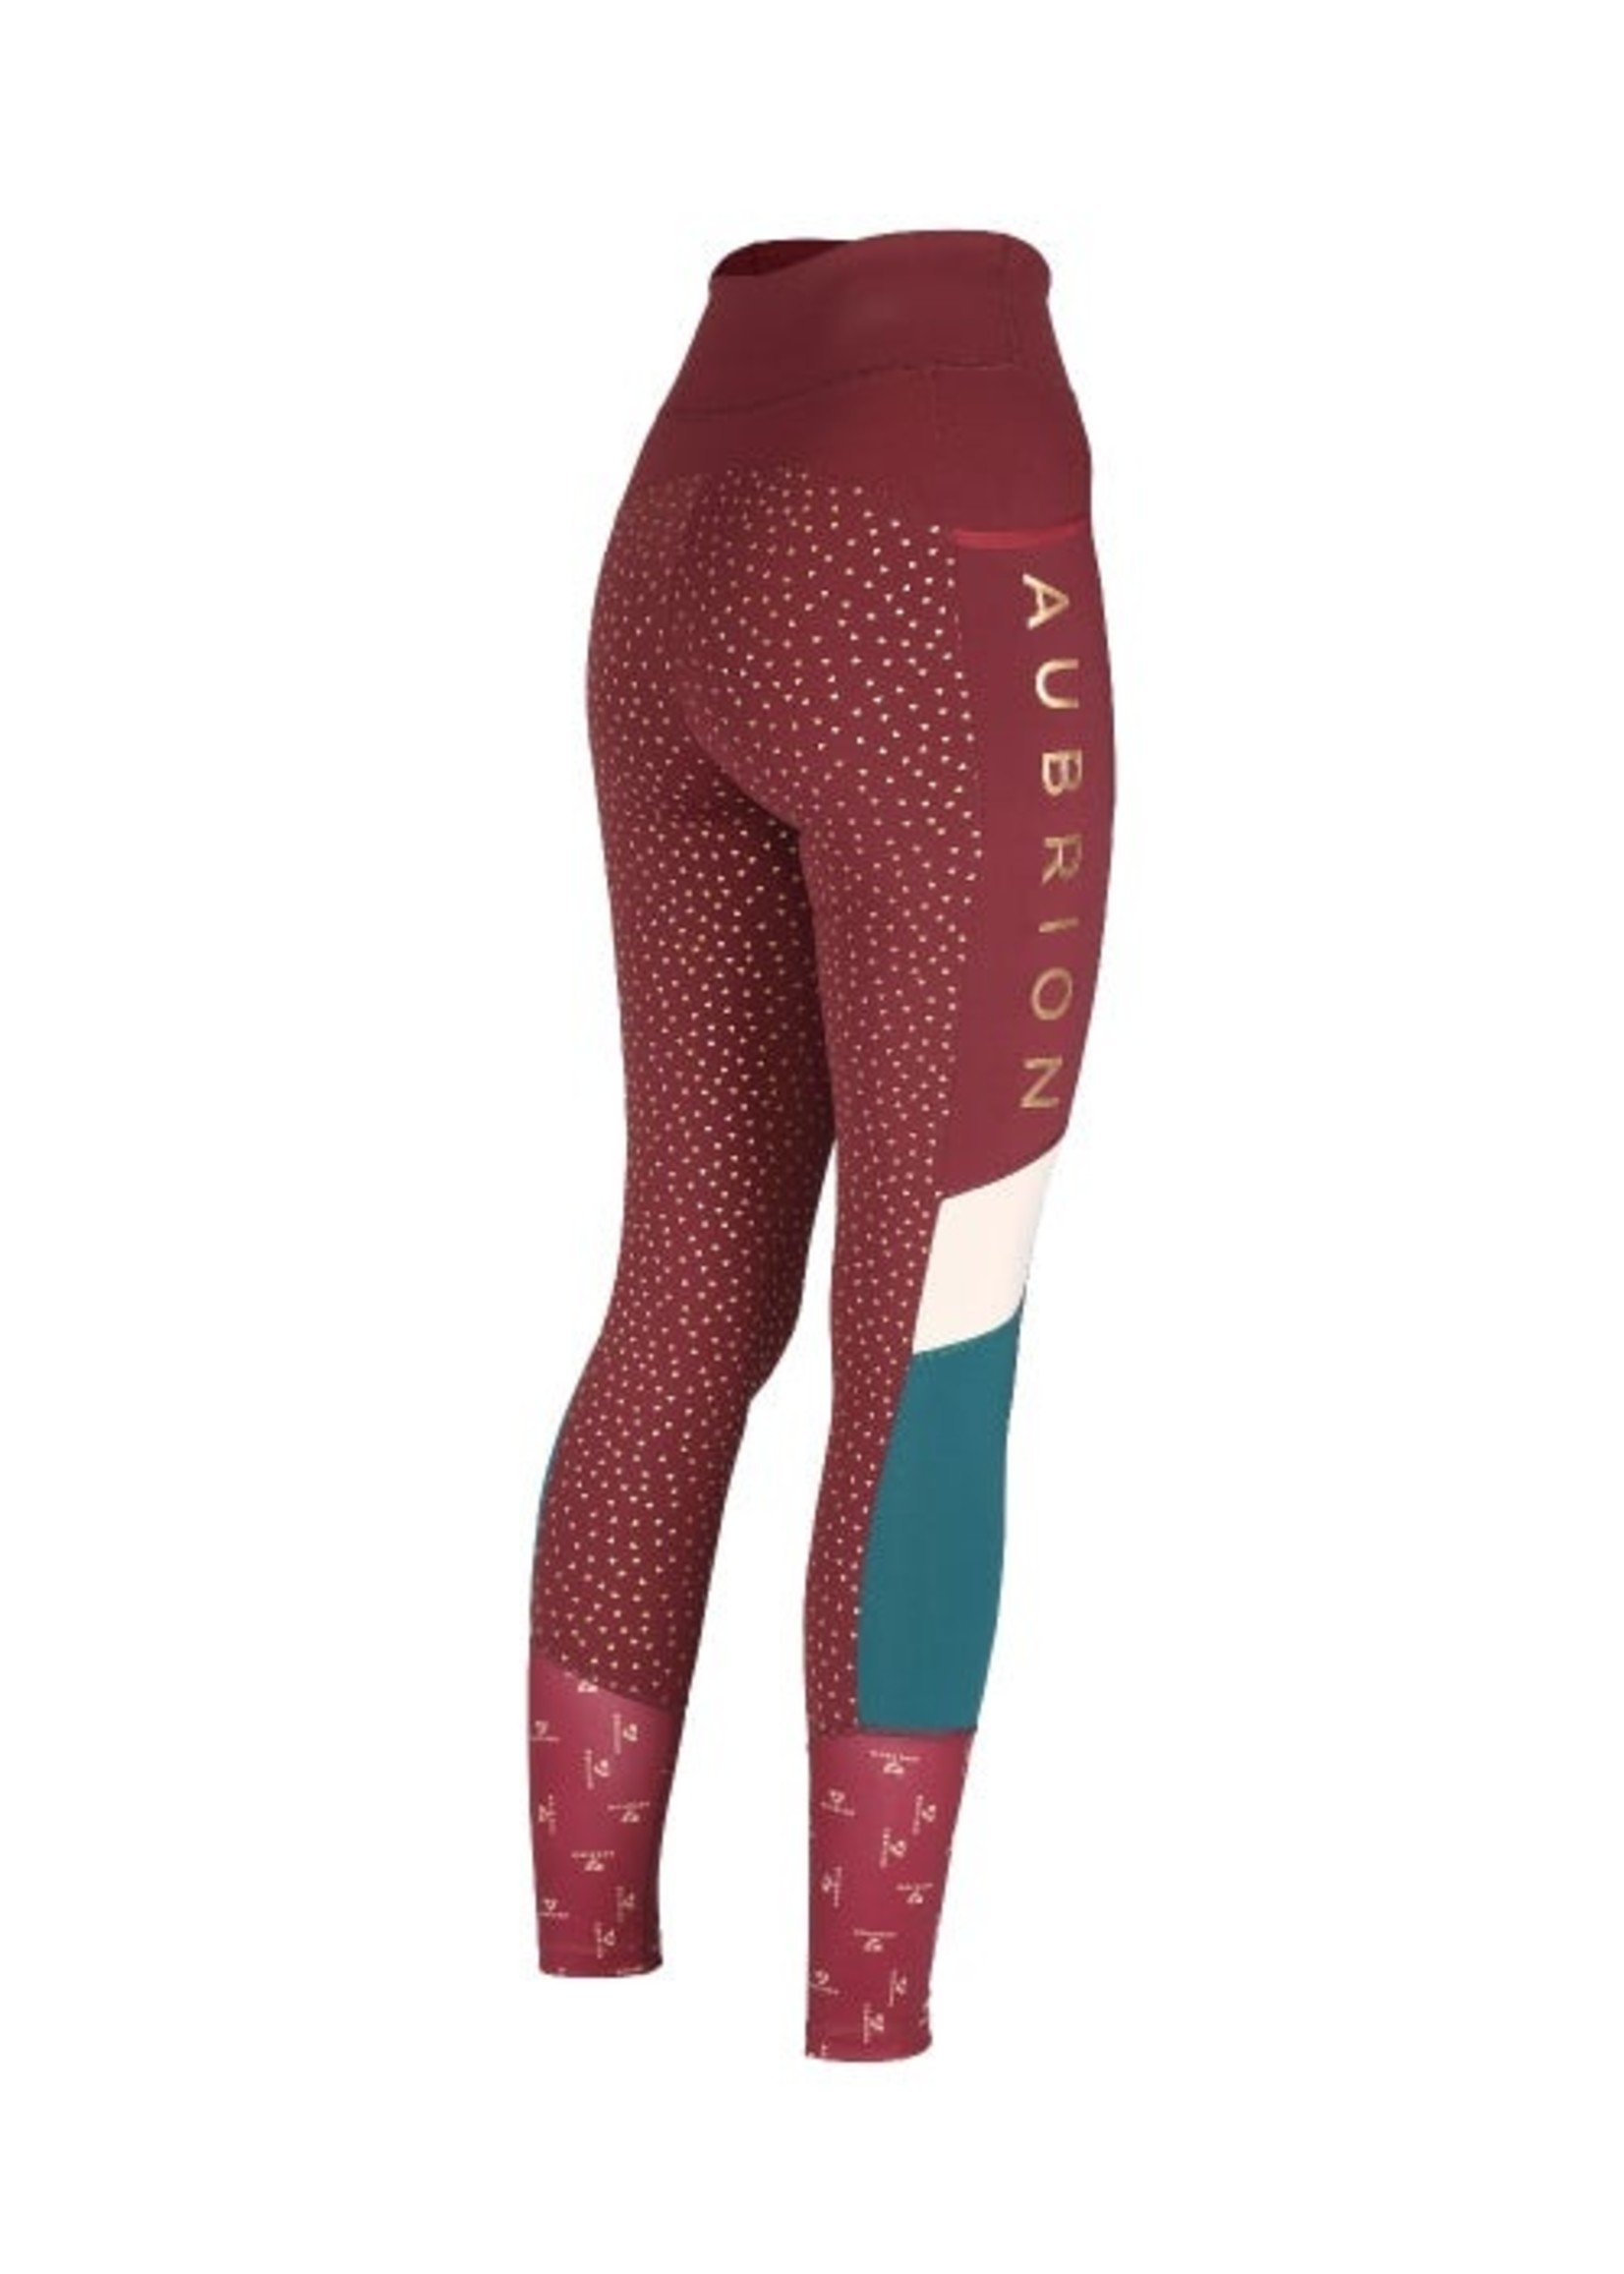 Shires Aubrion Eastcote Riding Tights